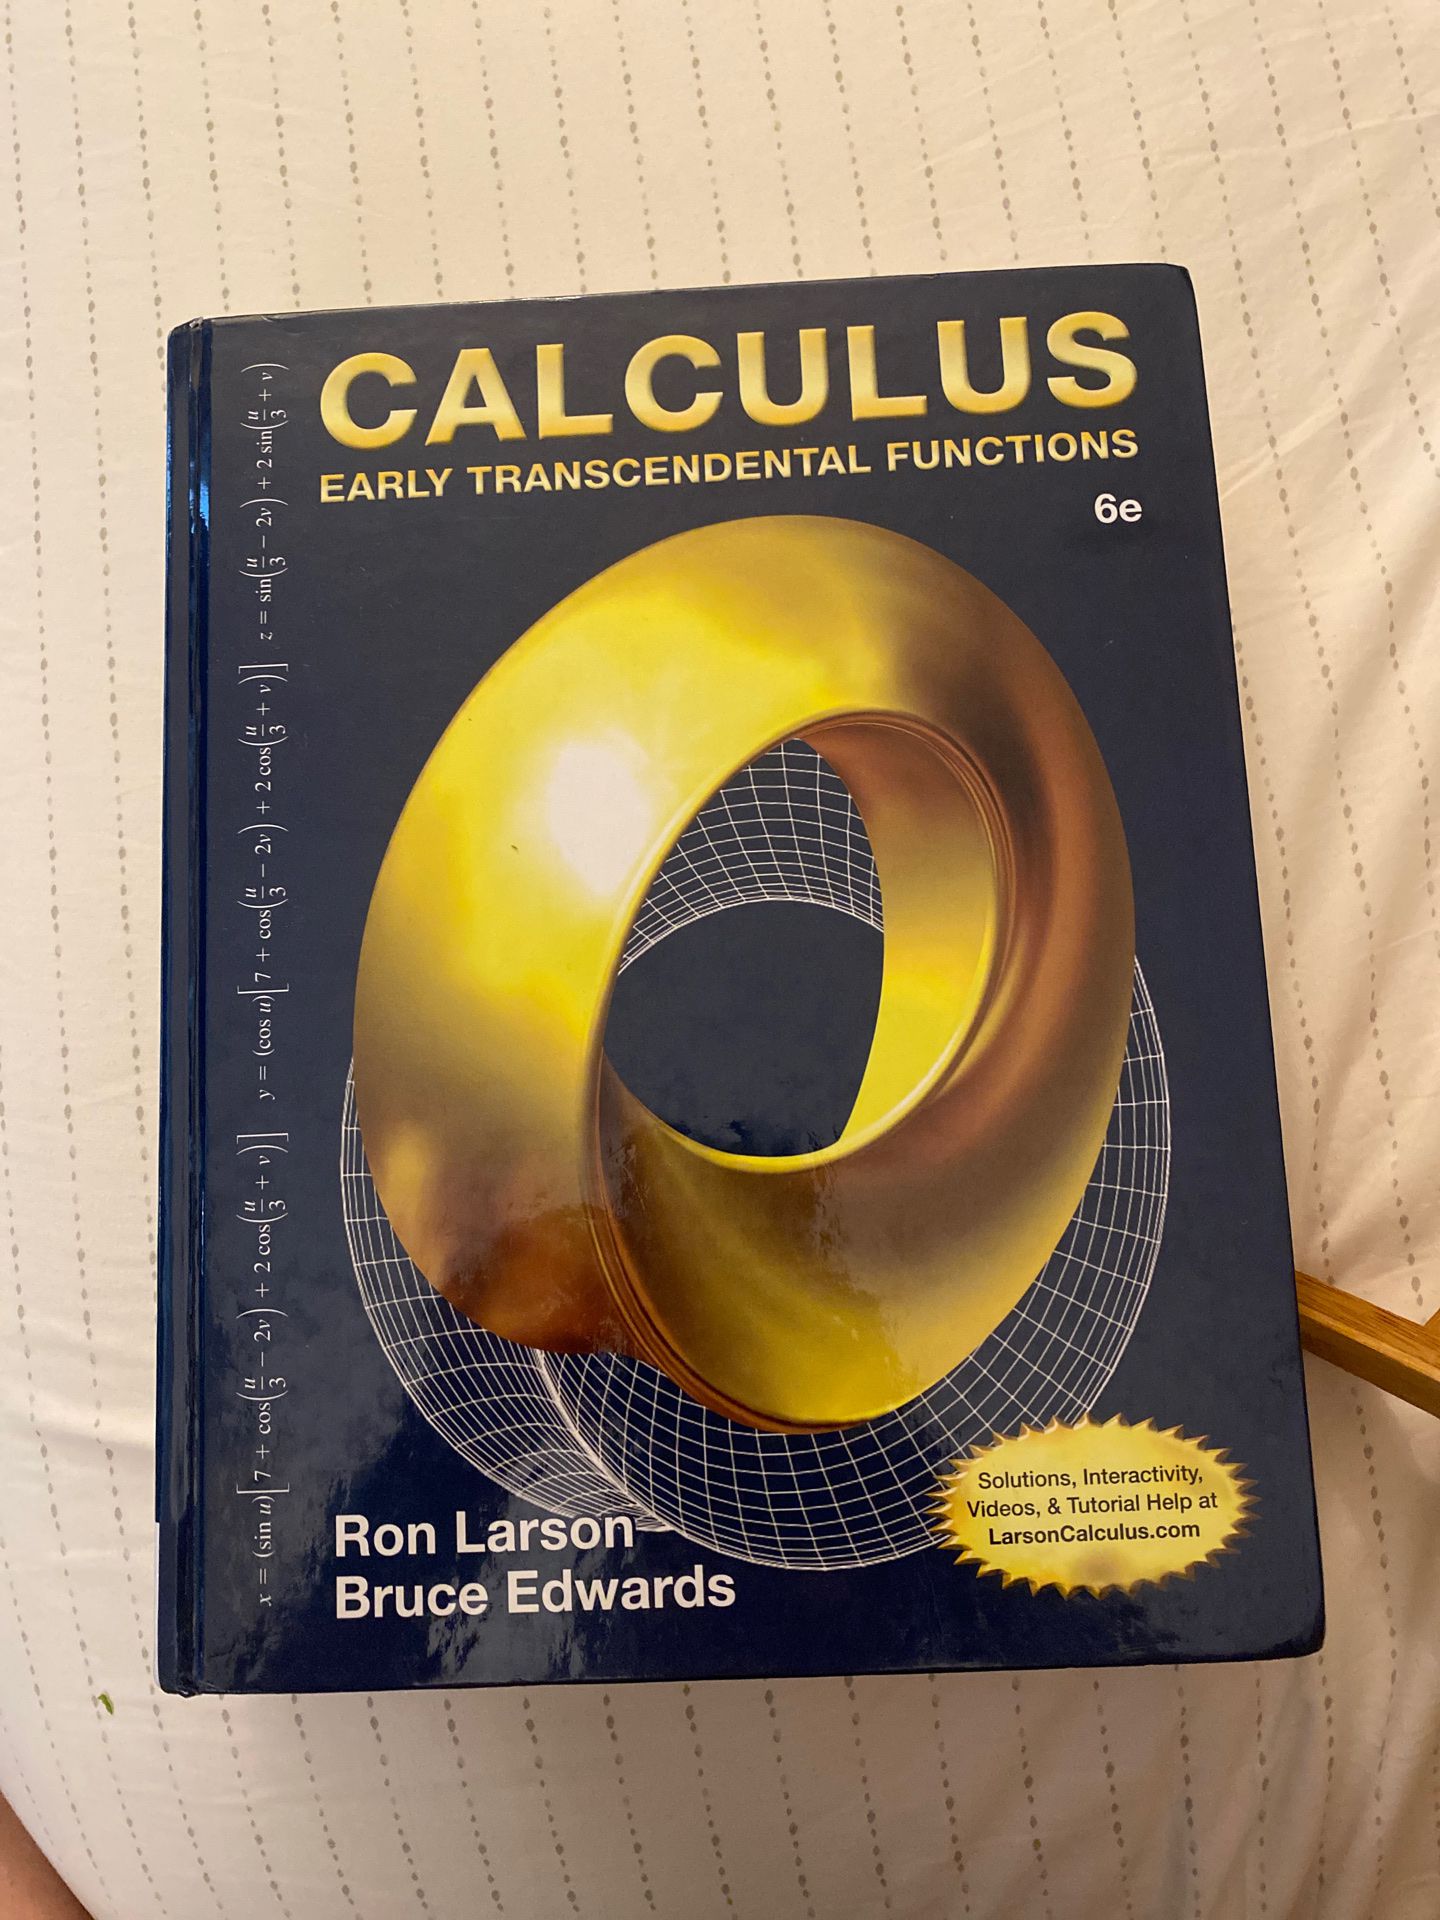 Calculus Early Transcendental Functions (6th edition)